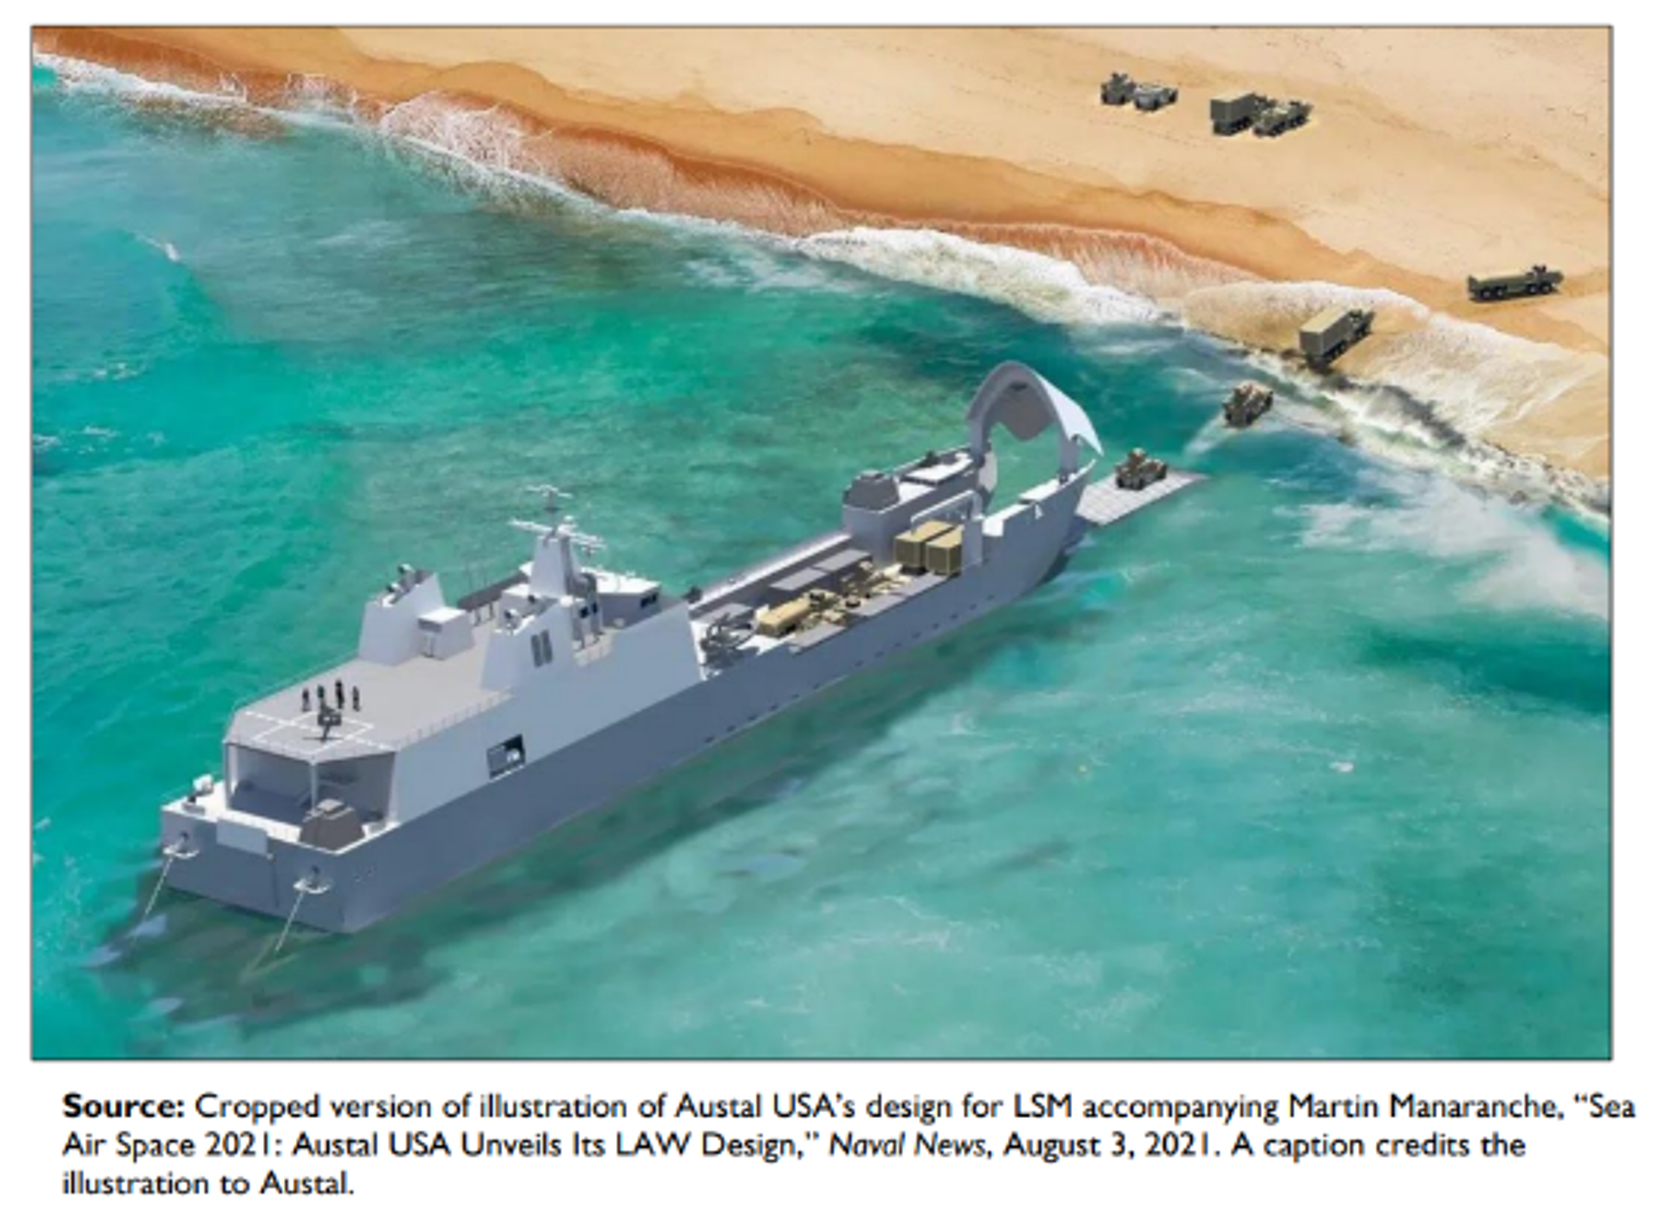 Source: Cropped version of illustration of Austral USA's design for LSM accompanying Martin Manaranche. “Sea Air Space 2021: Austal USA Unveils lts LAW Design,” Naval News, August 3, 2021. A caption credits the illustration to Austal.